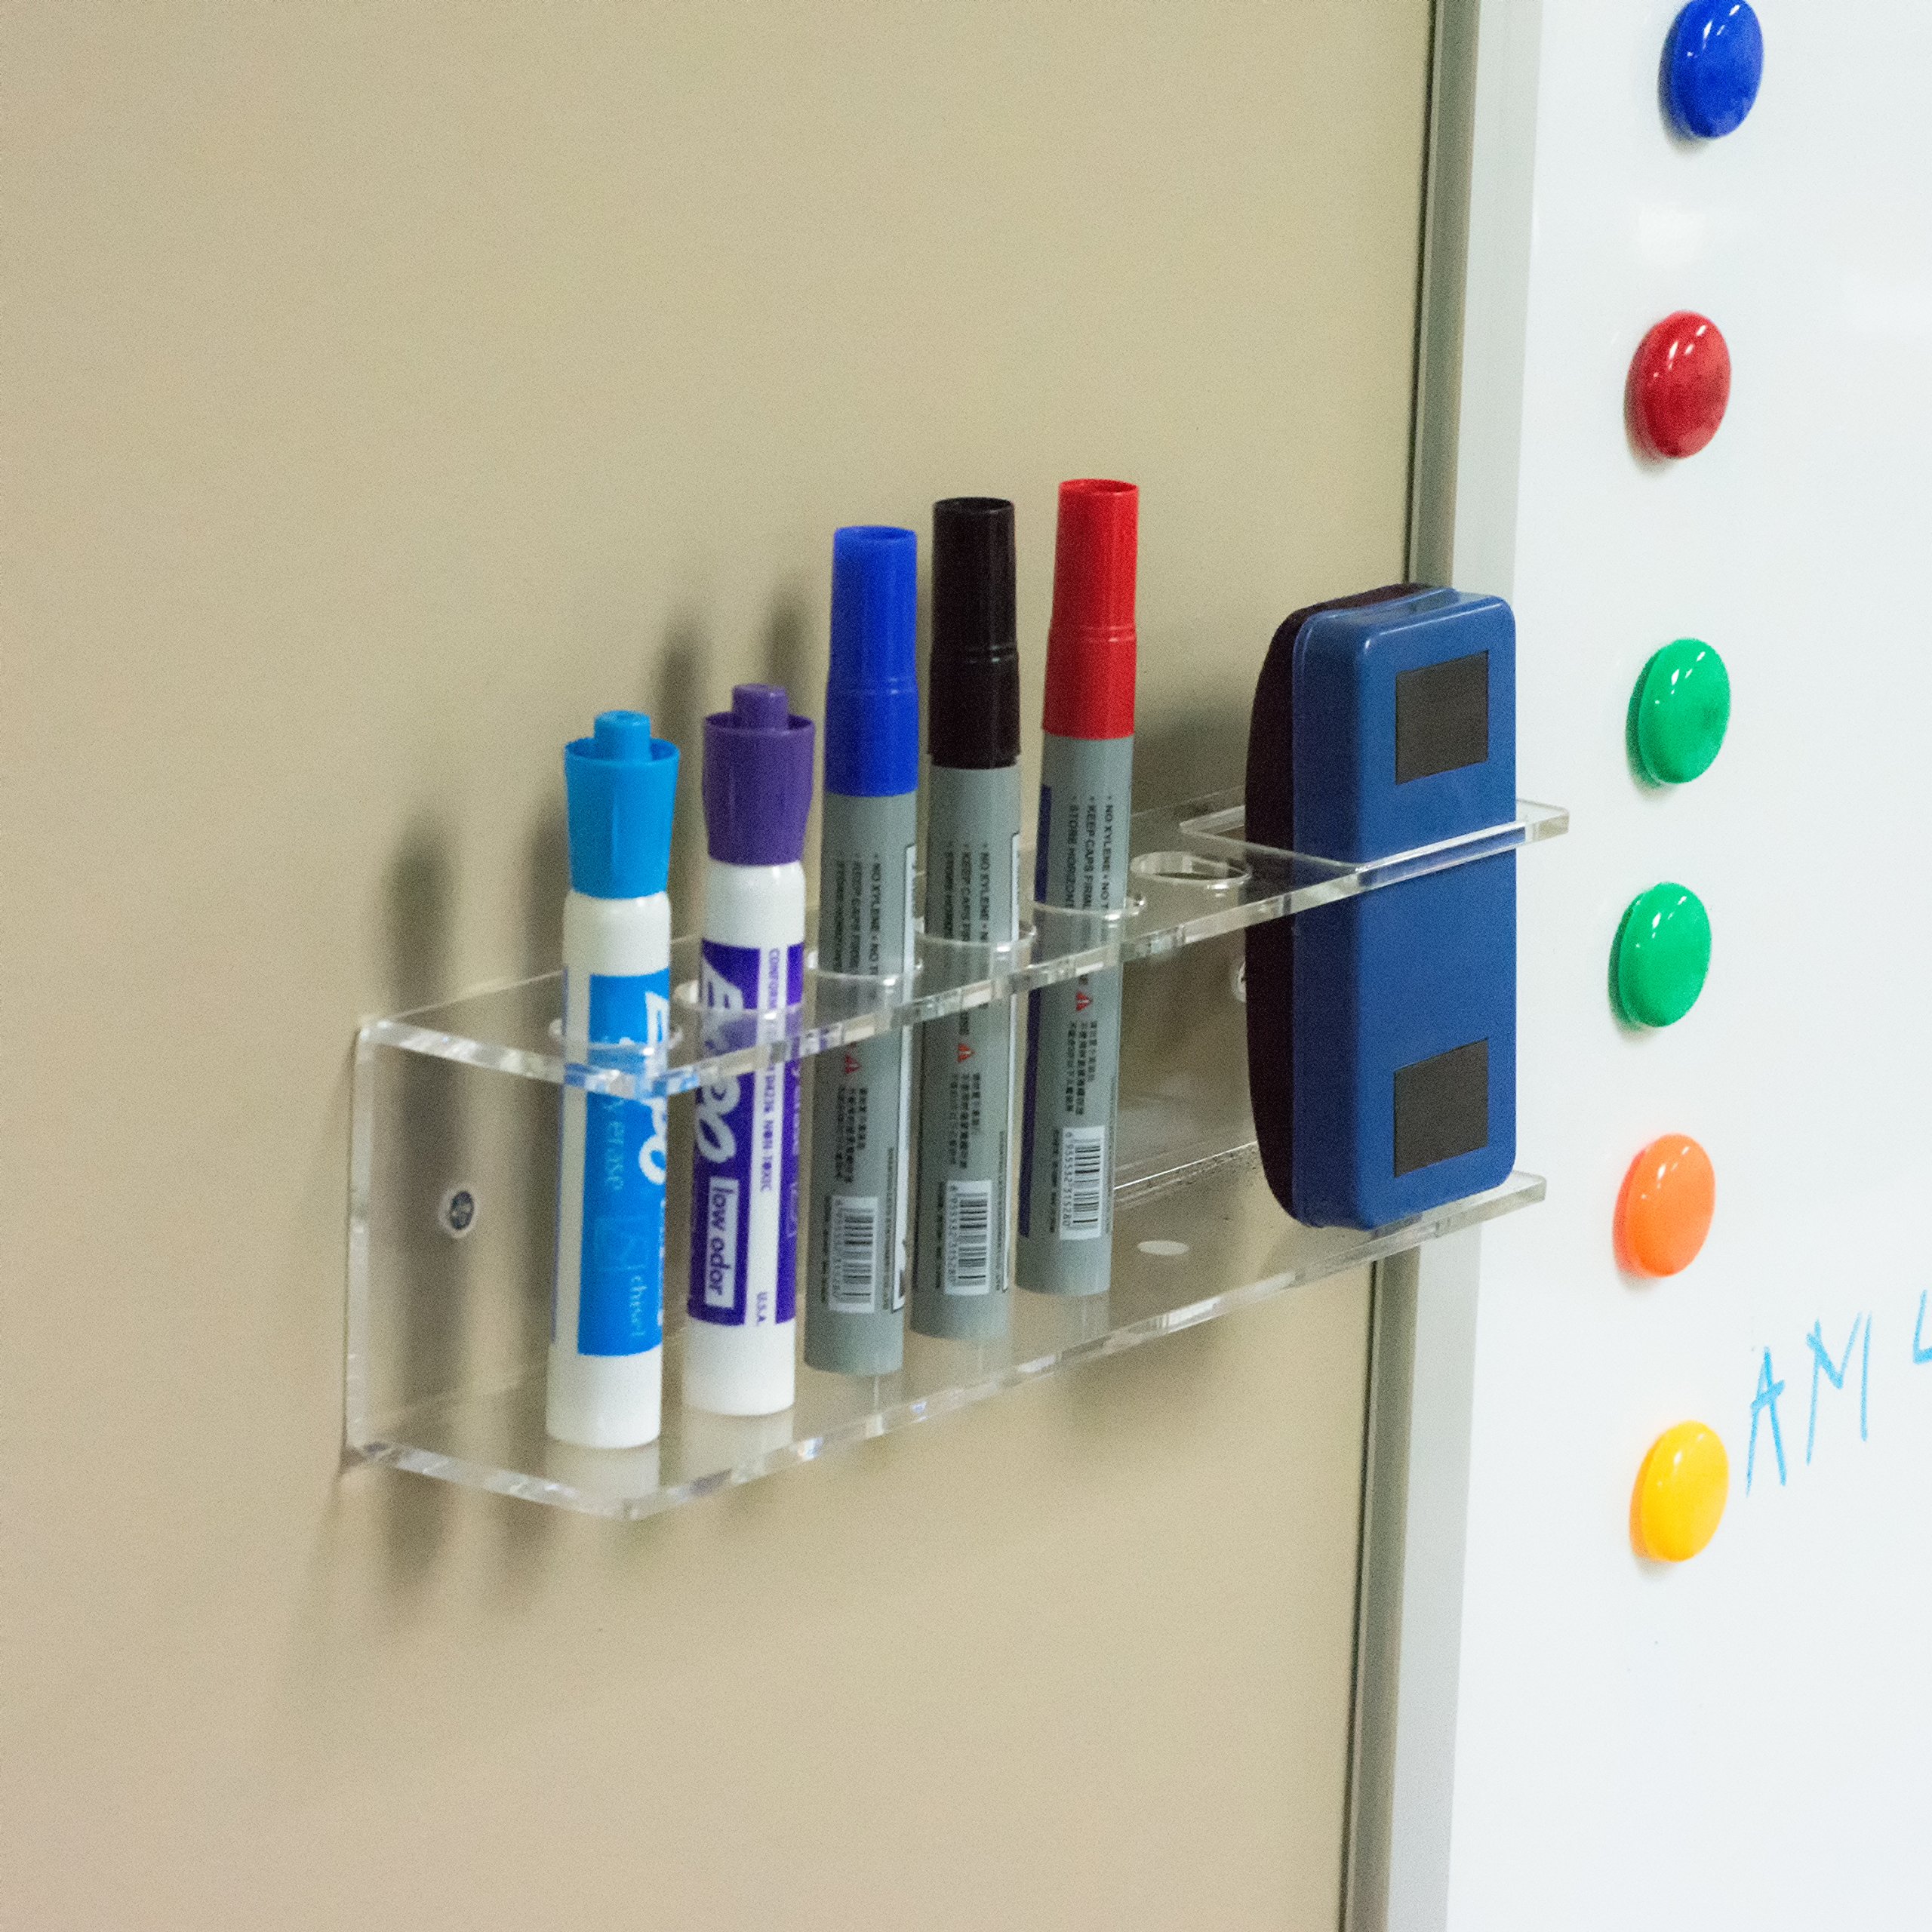 MyGift Clear Acrylic Wall Mounted Dry Erase Marker Holder Organizer, Whiteboard Accessories Rack with 7 Slots for Markers and Eraser